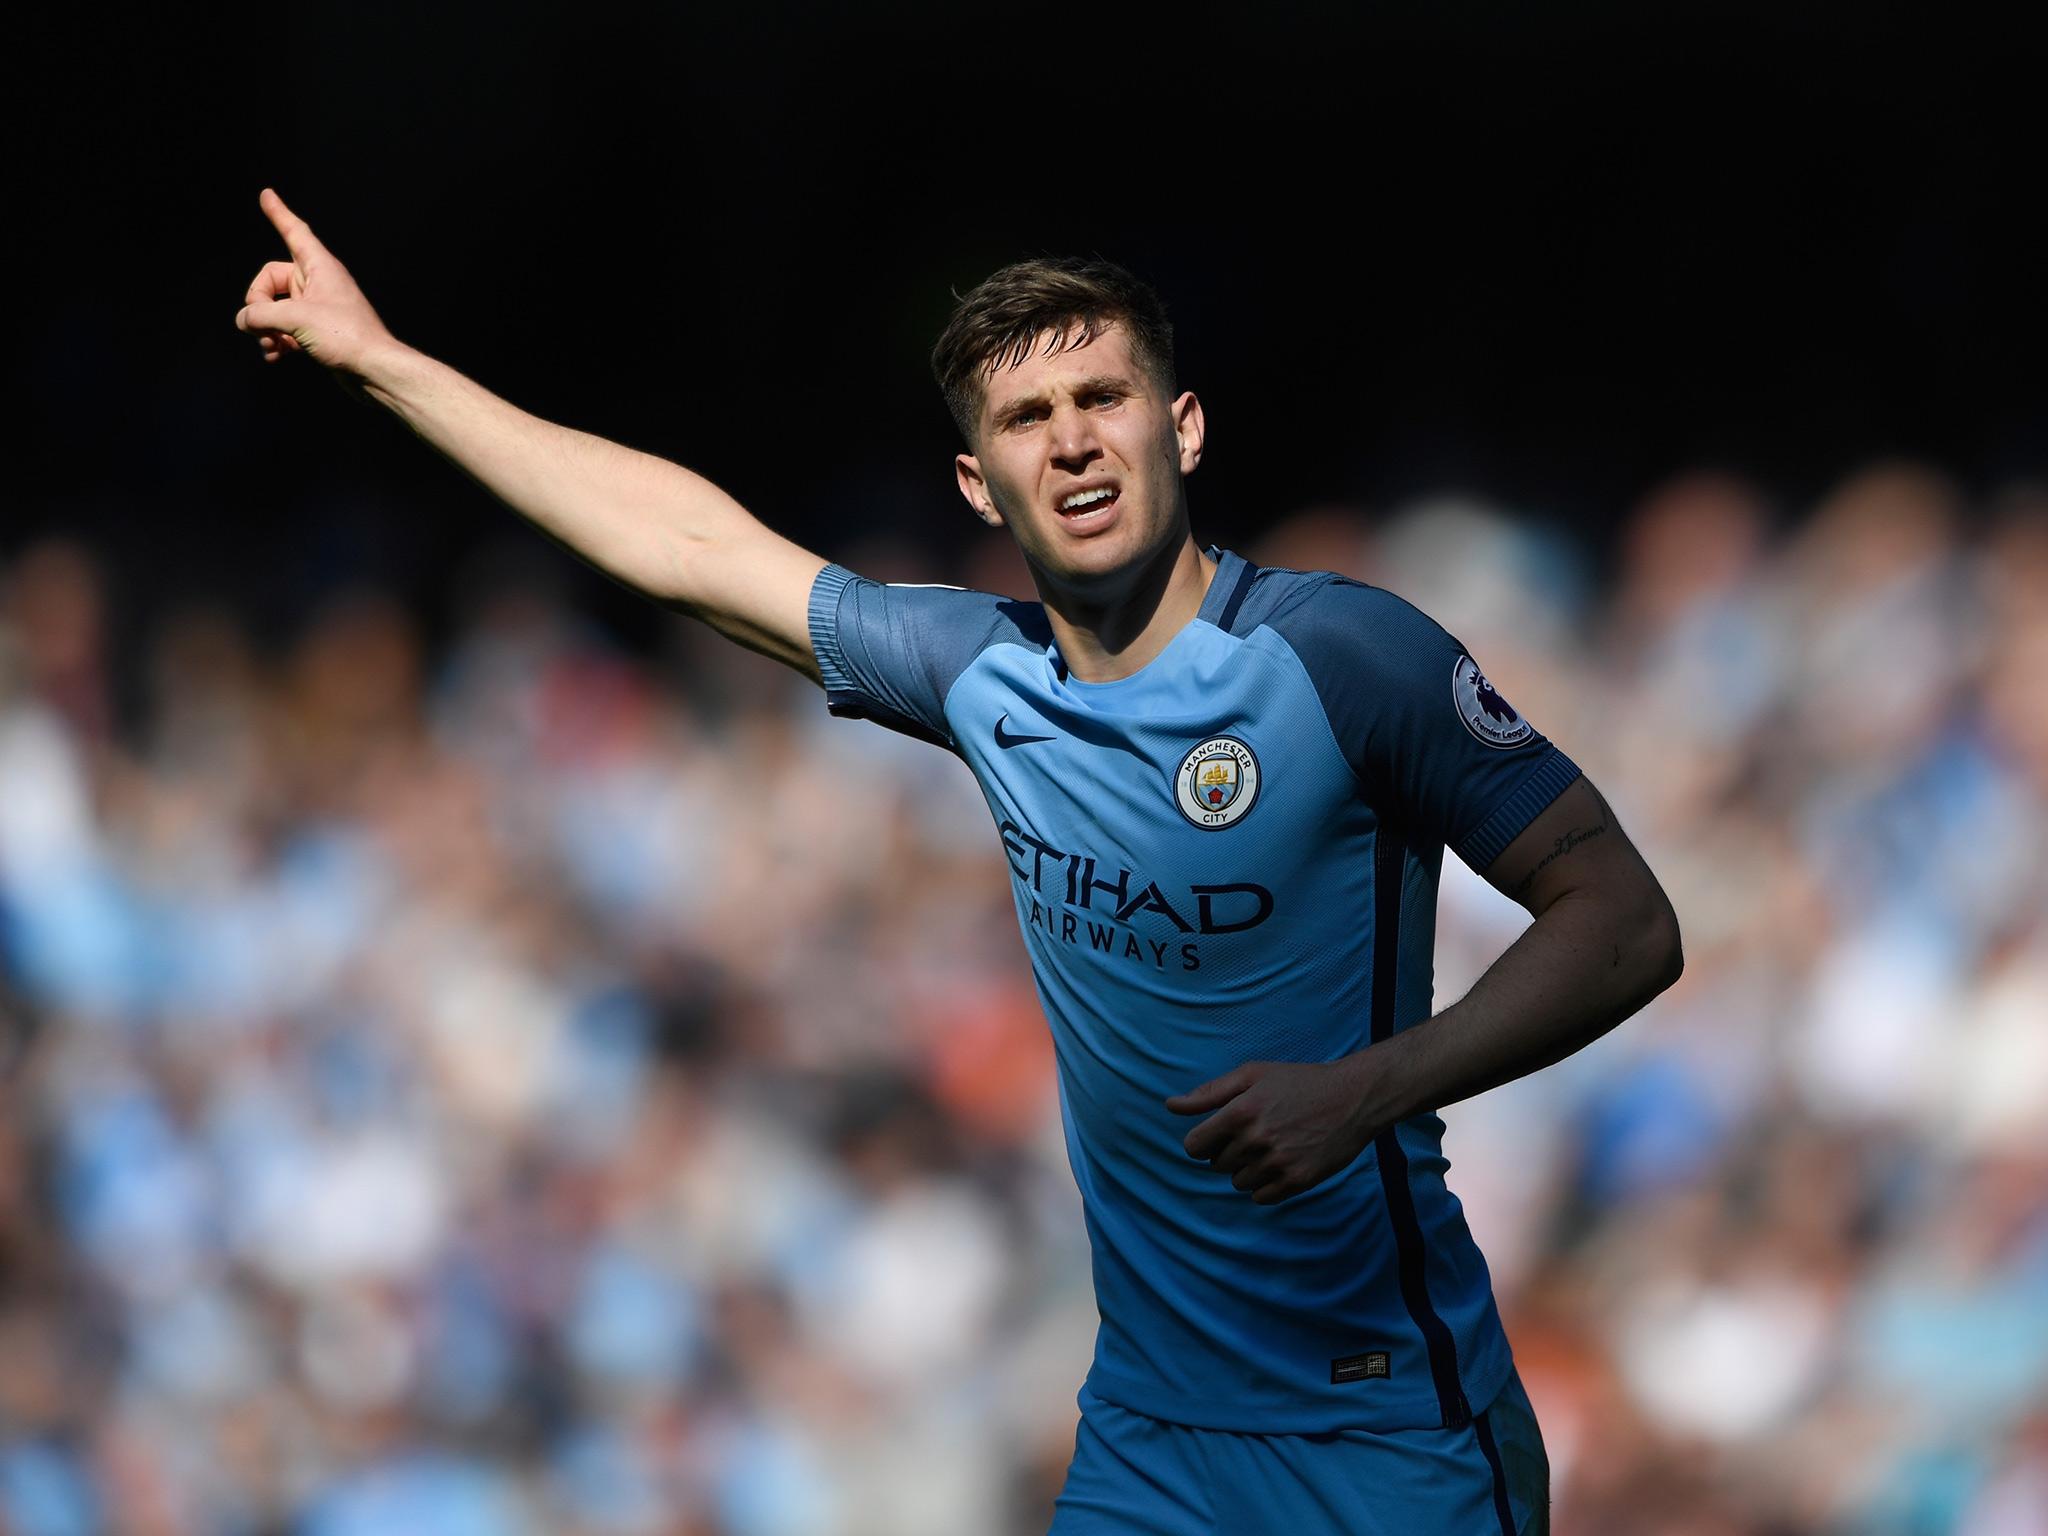 Stones can establish himself as City's best defender and England's first choice for World Cup 2018